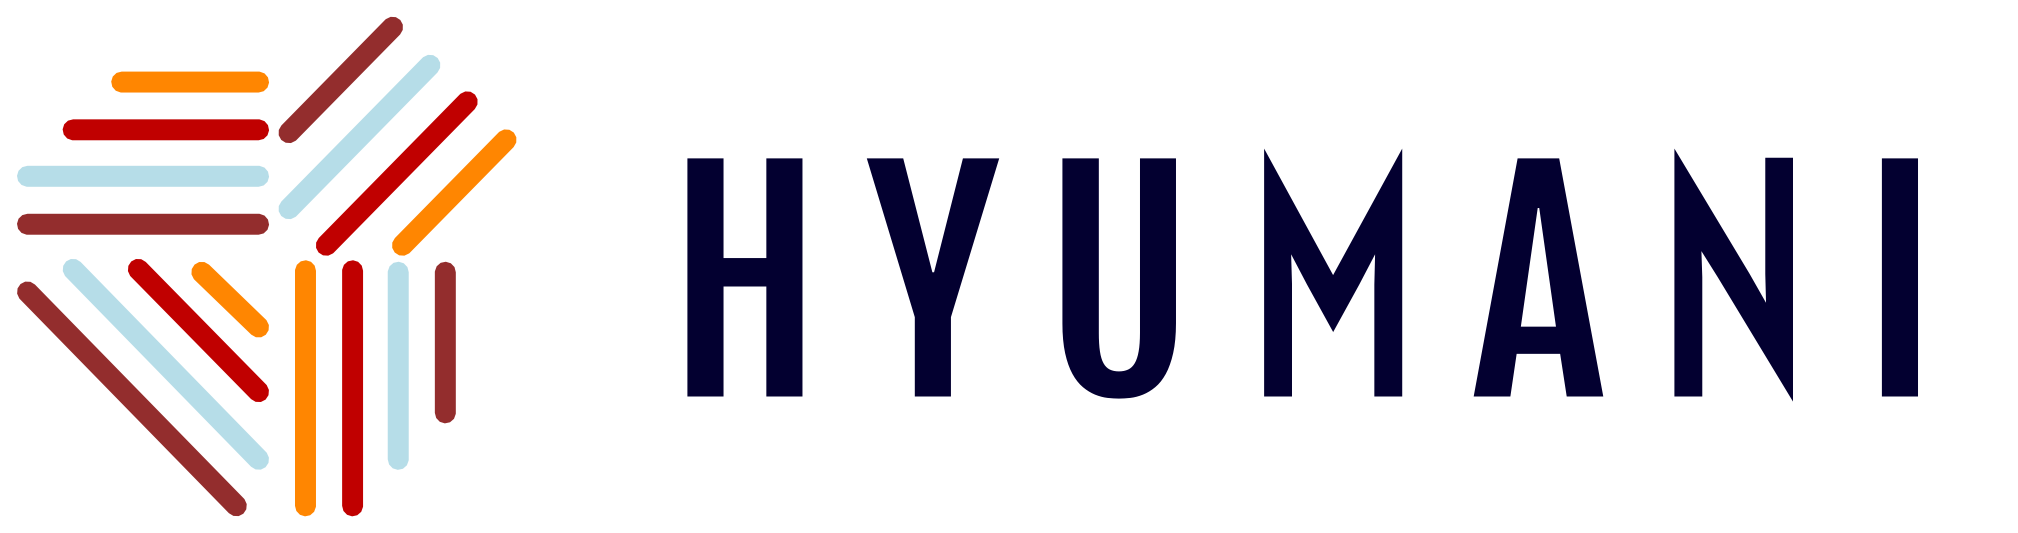 hyumani.com - solution for self management and self possession via human nature and 4 temperaments types to be a happy person